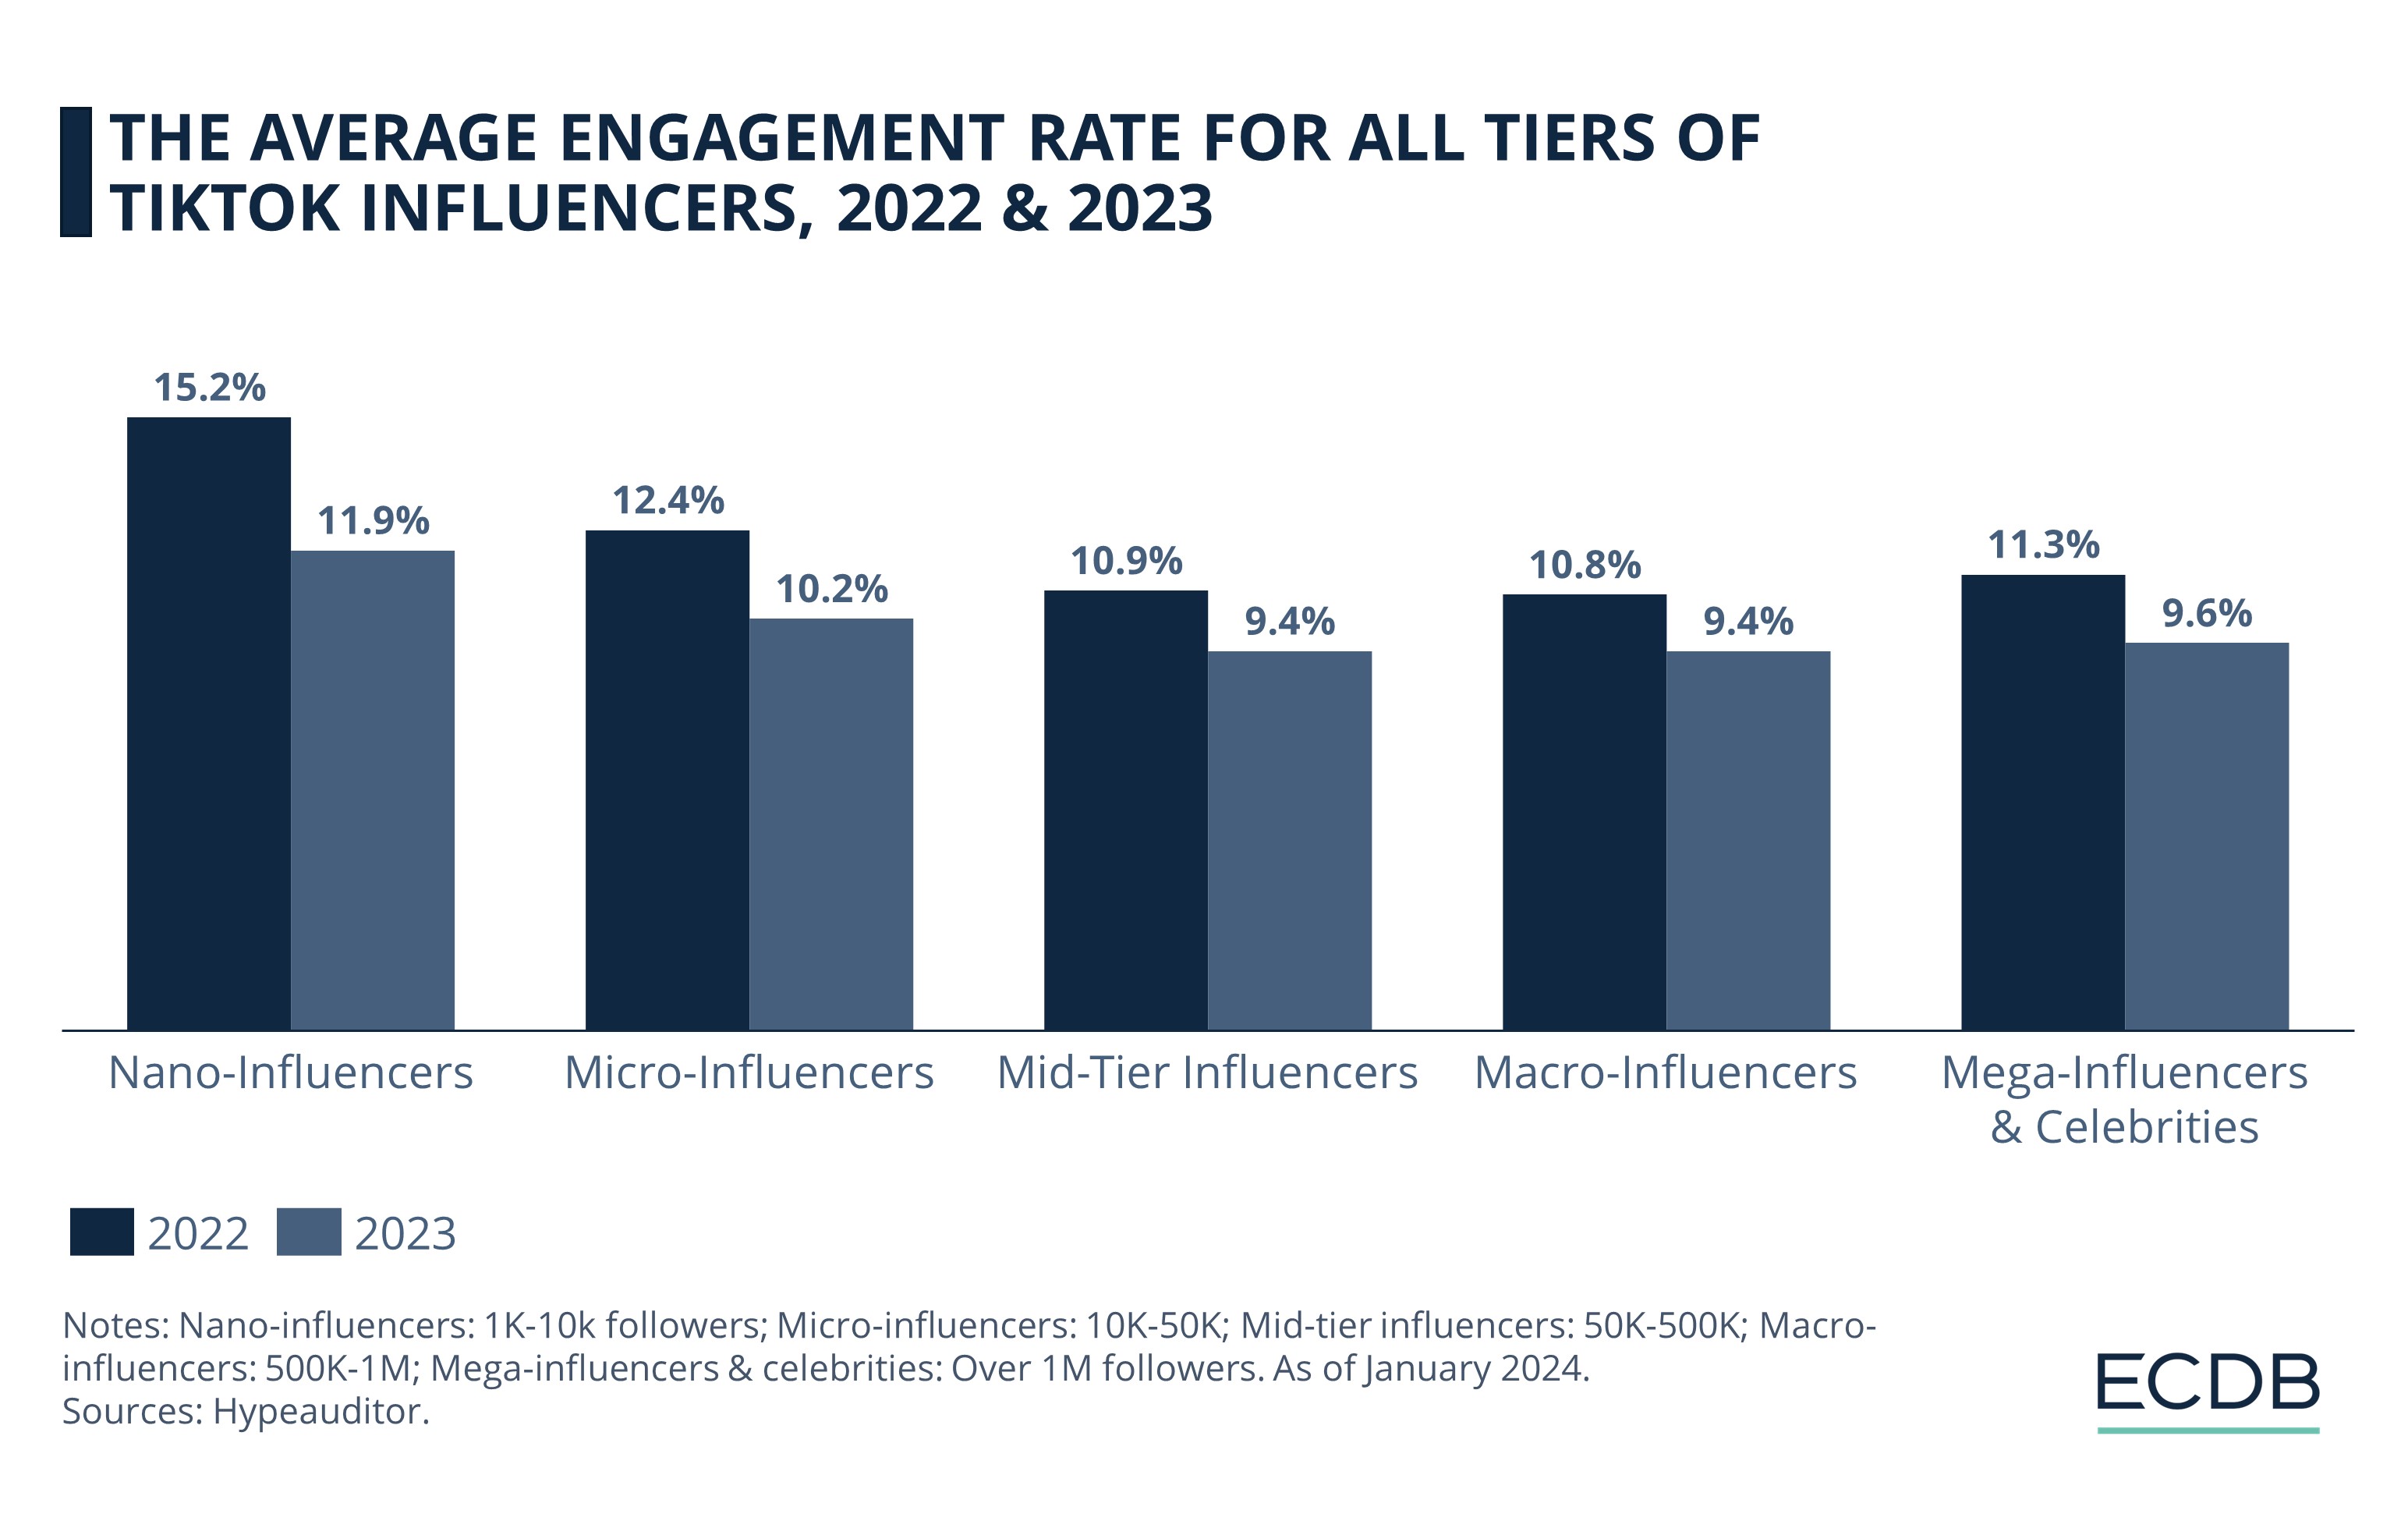 The Average Engagement Rate for All Tiers of TikTok Influencers, 2022 & 2023